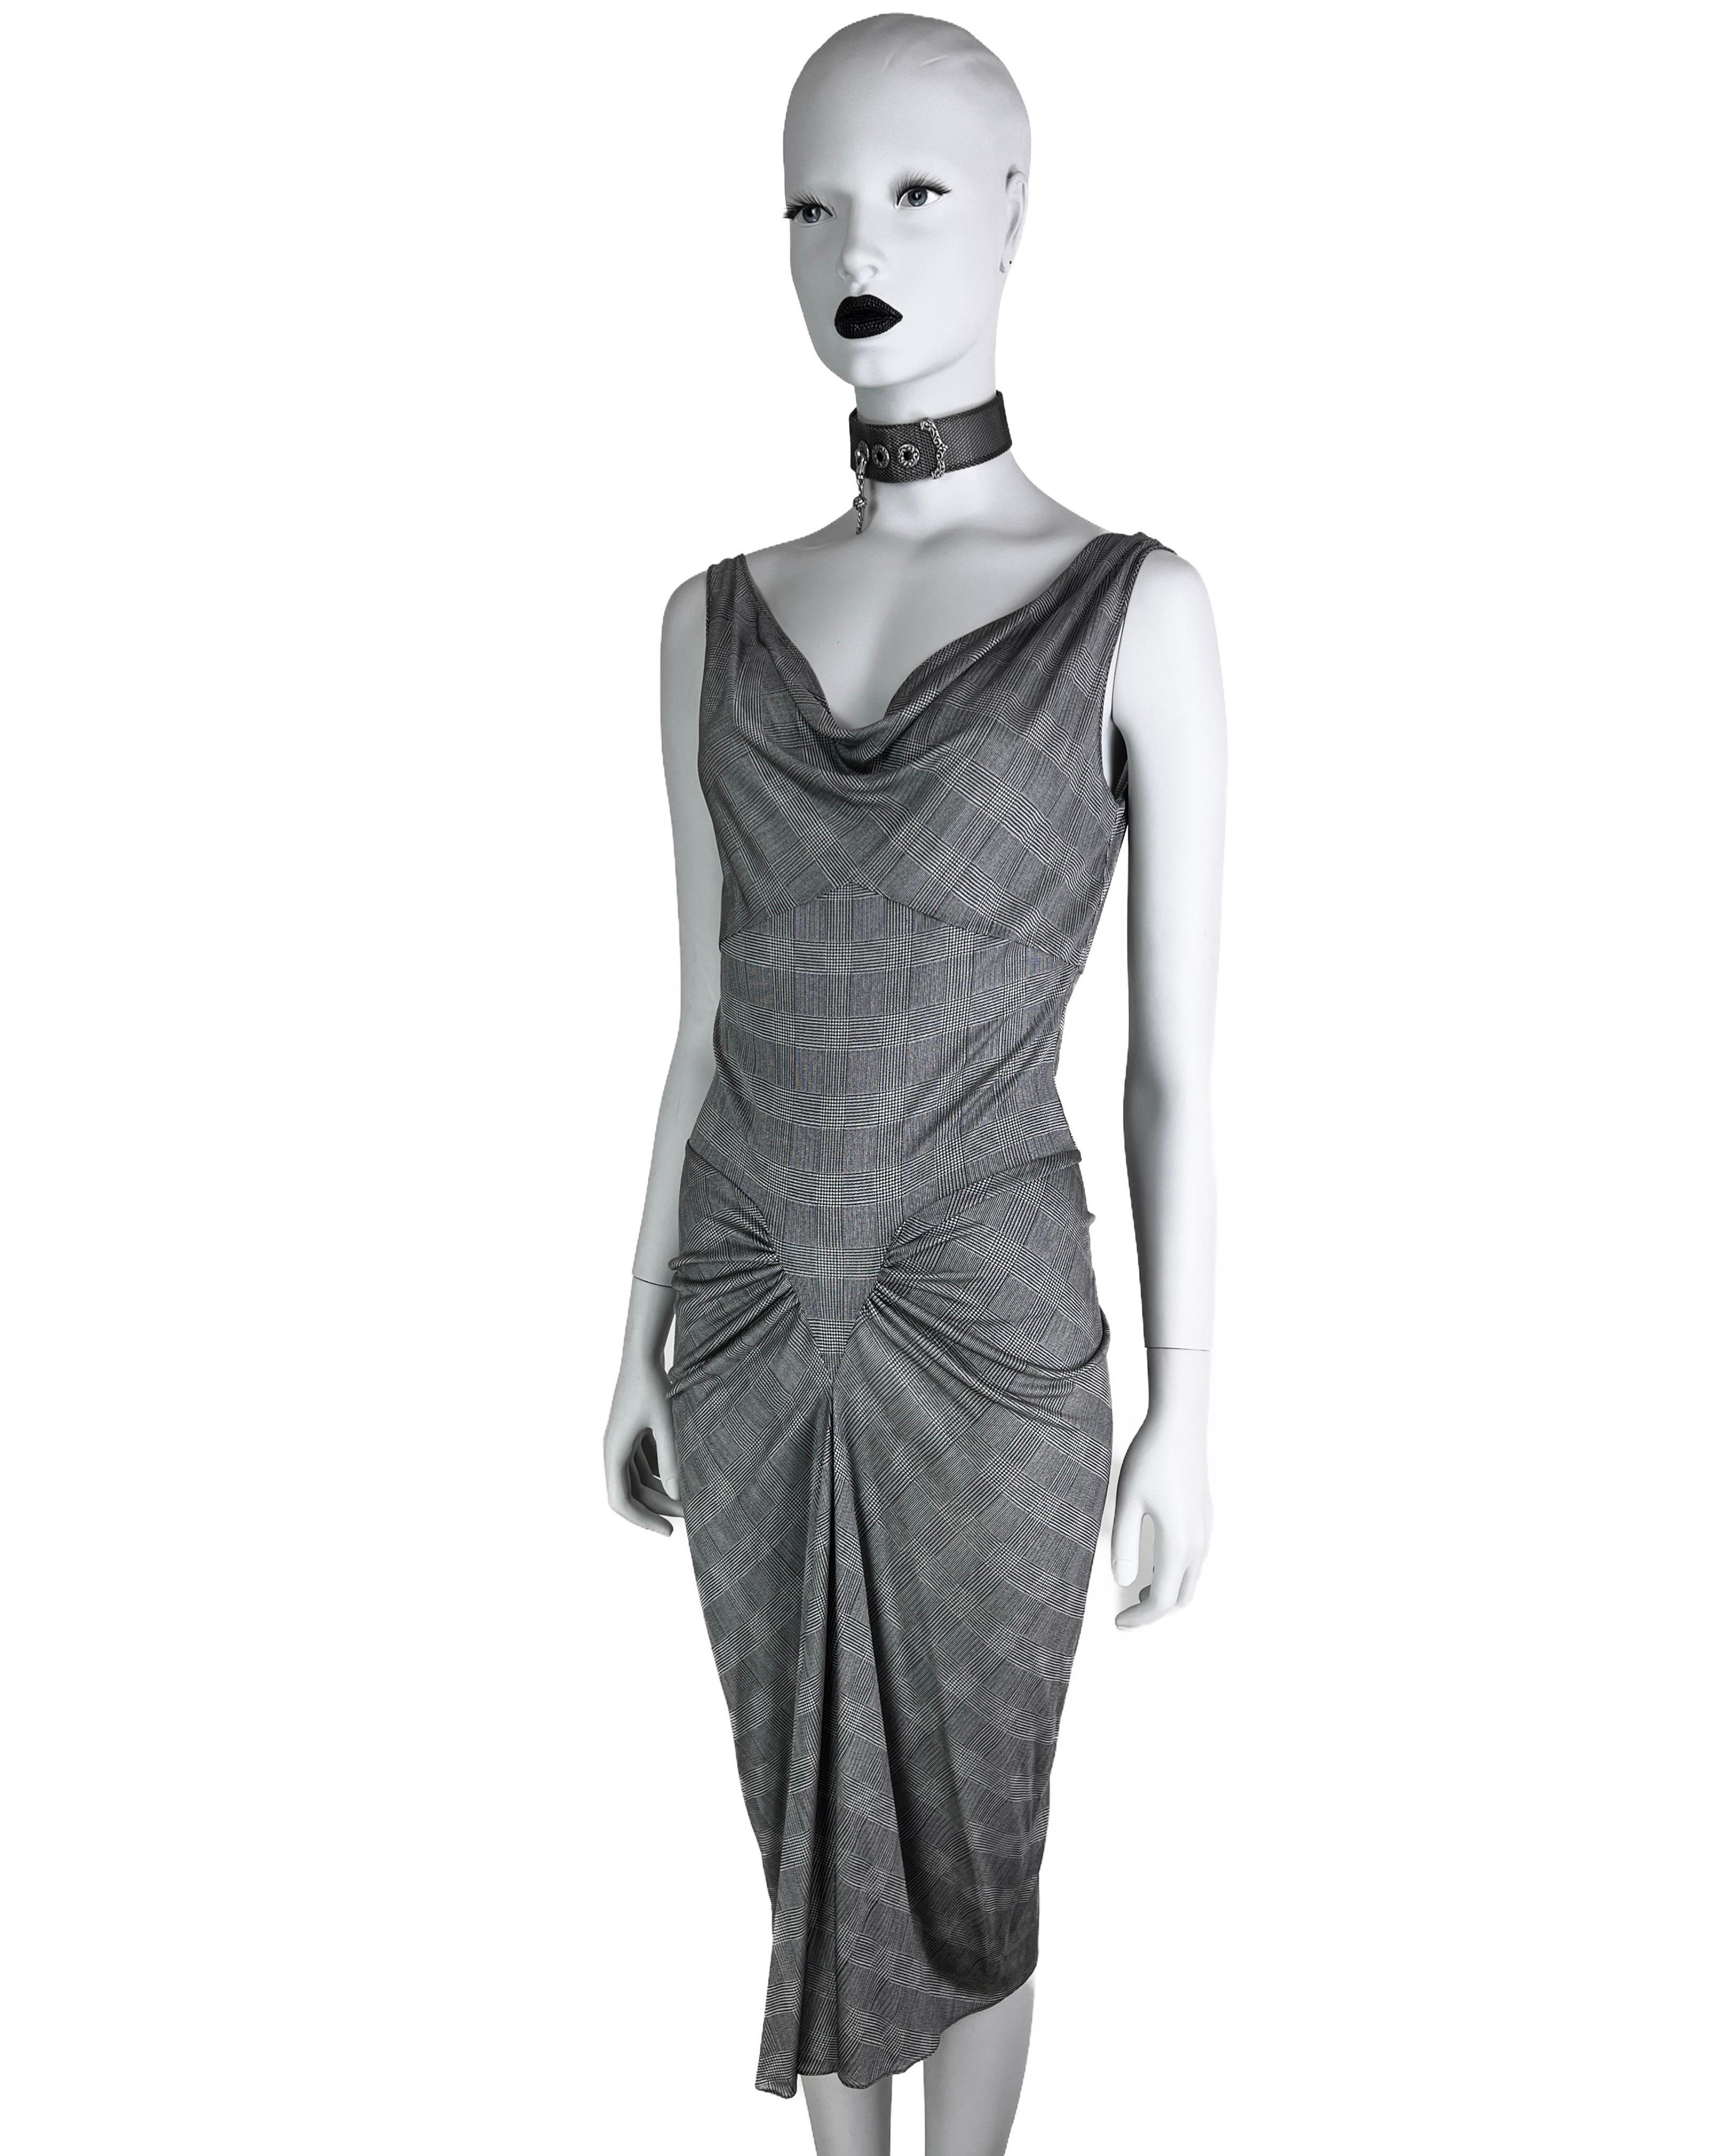 Dior by John Galliano Spring 2000 Plaid Print Silk Draped Grey Jersey Dress In Excellent Condition For Sale In Prague, CZ